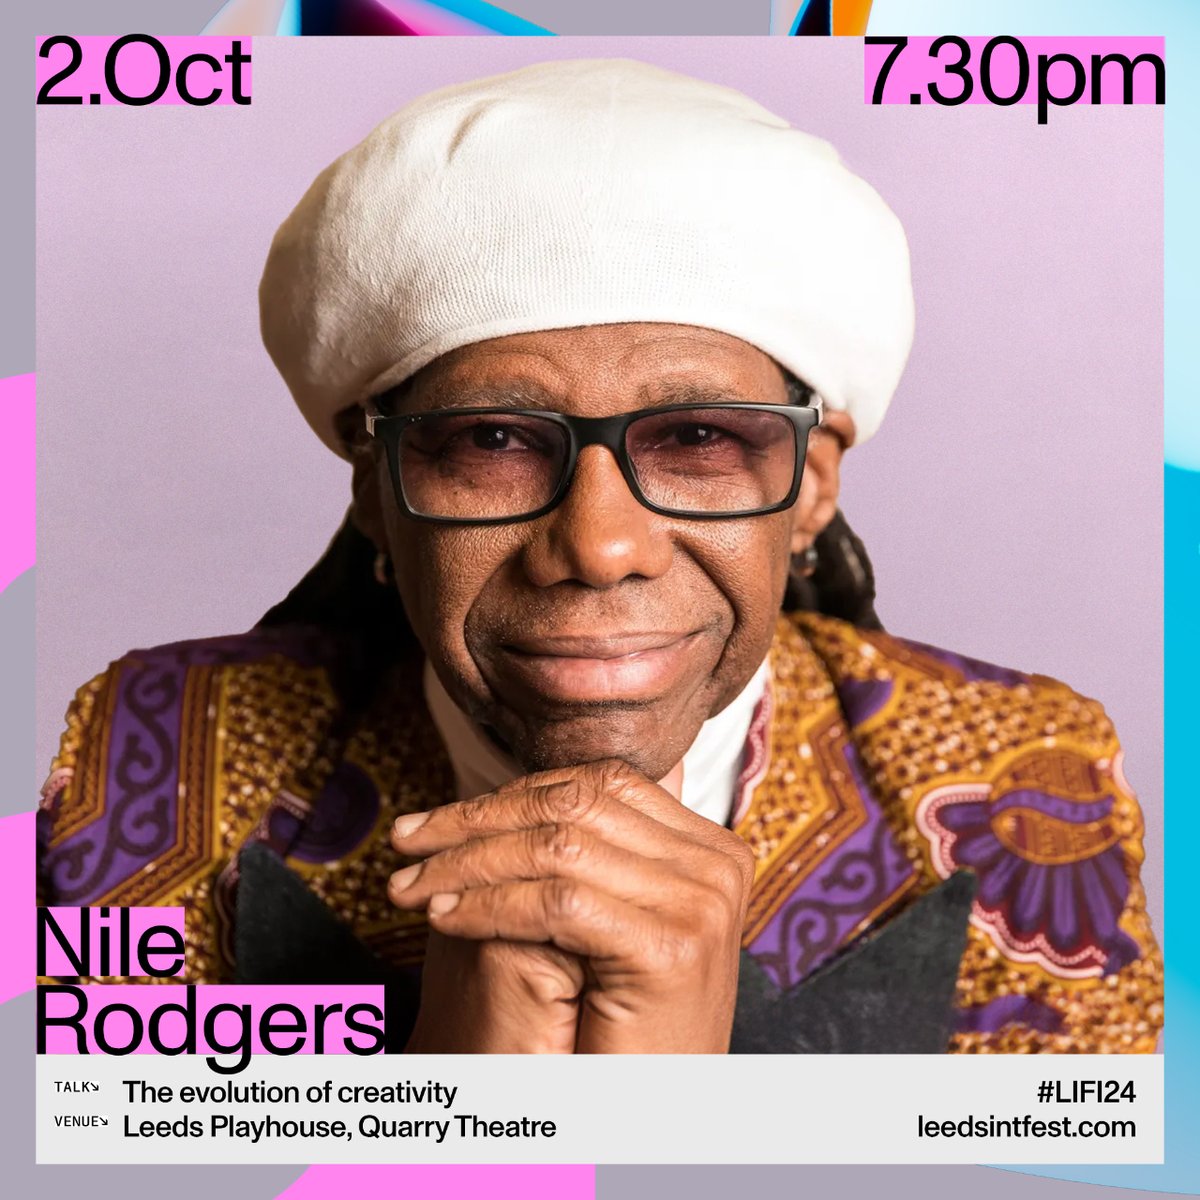 @laurenwindle_ EVENT: The evolution of creativity with @nilerodgers @bekaontoast  The last 50 years have seen both music and the industry around it change beyond recognition. It’s time to unpack what that means for artists and listeners today #LIFI24 📆 Wednesday 2 Oct 🕐 7:30 PM 3/12🧵